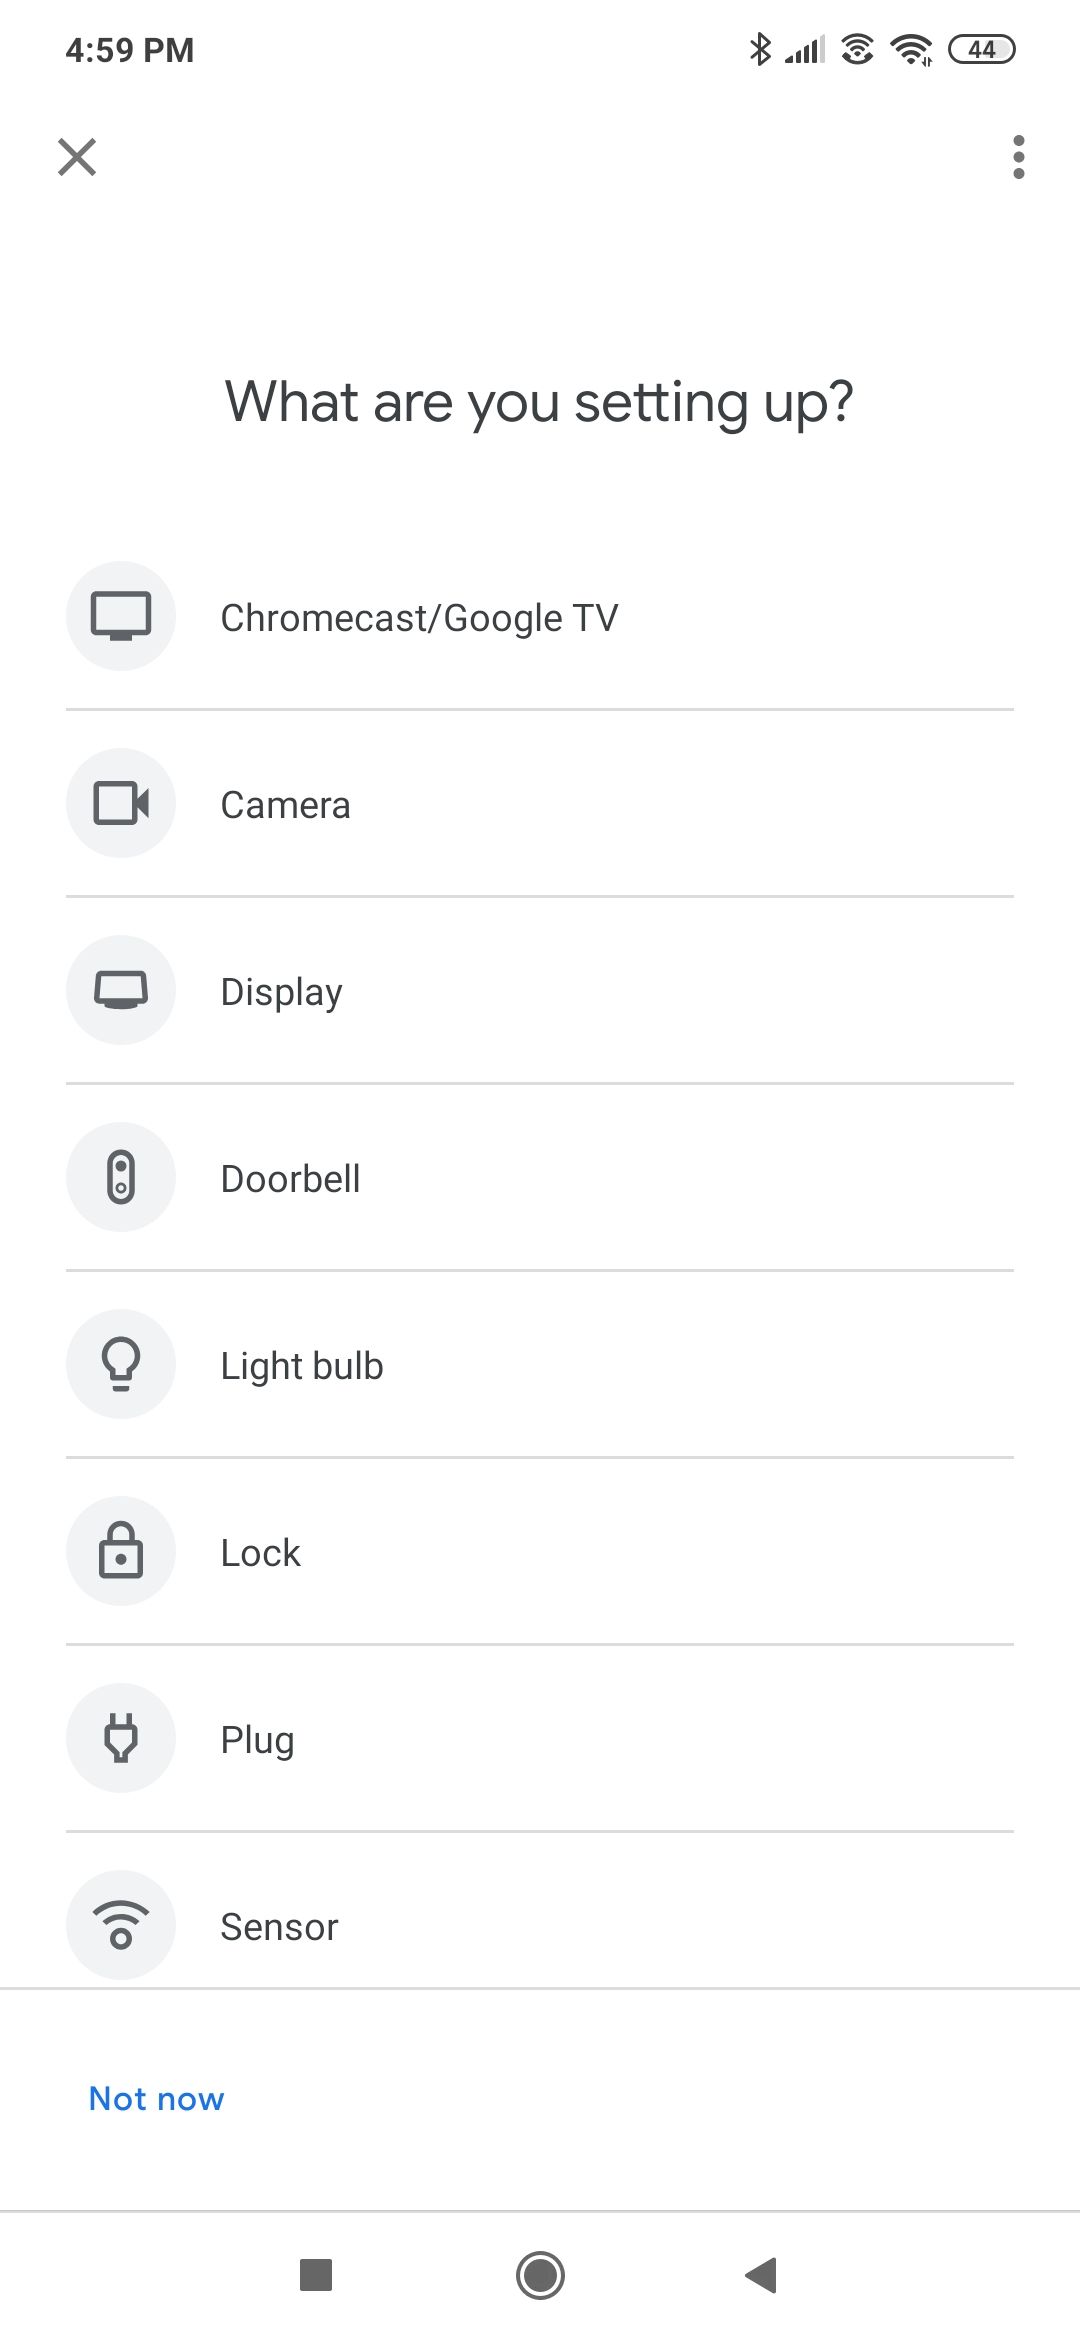 Device choices on the Google Home app